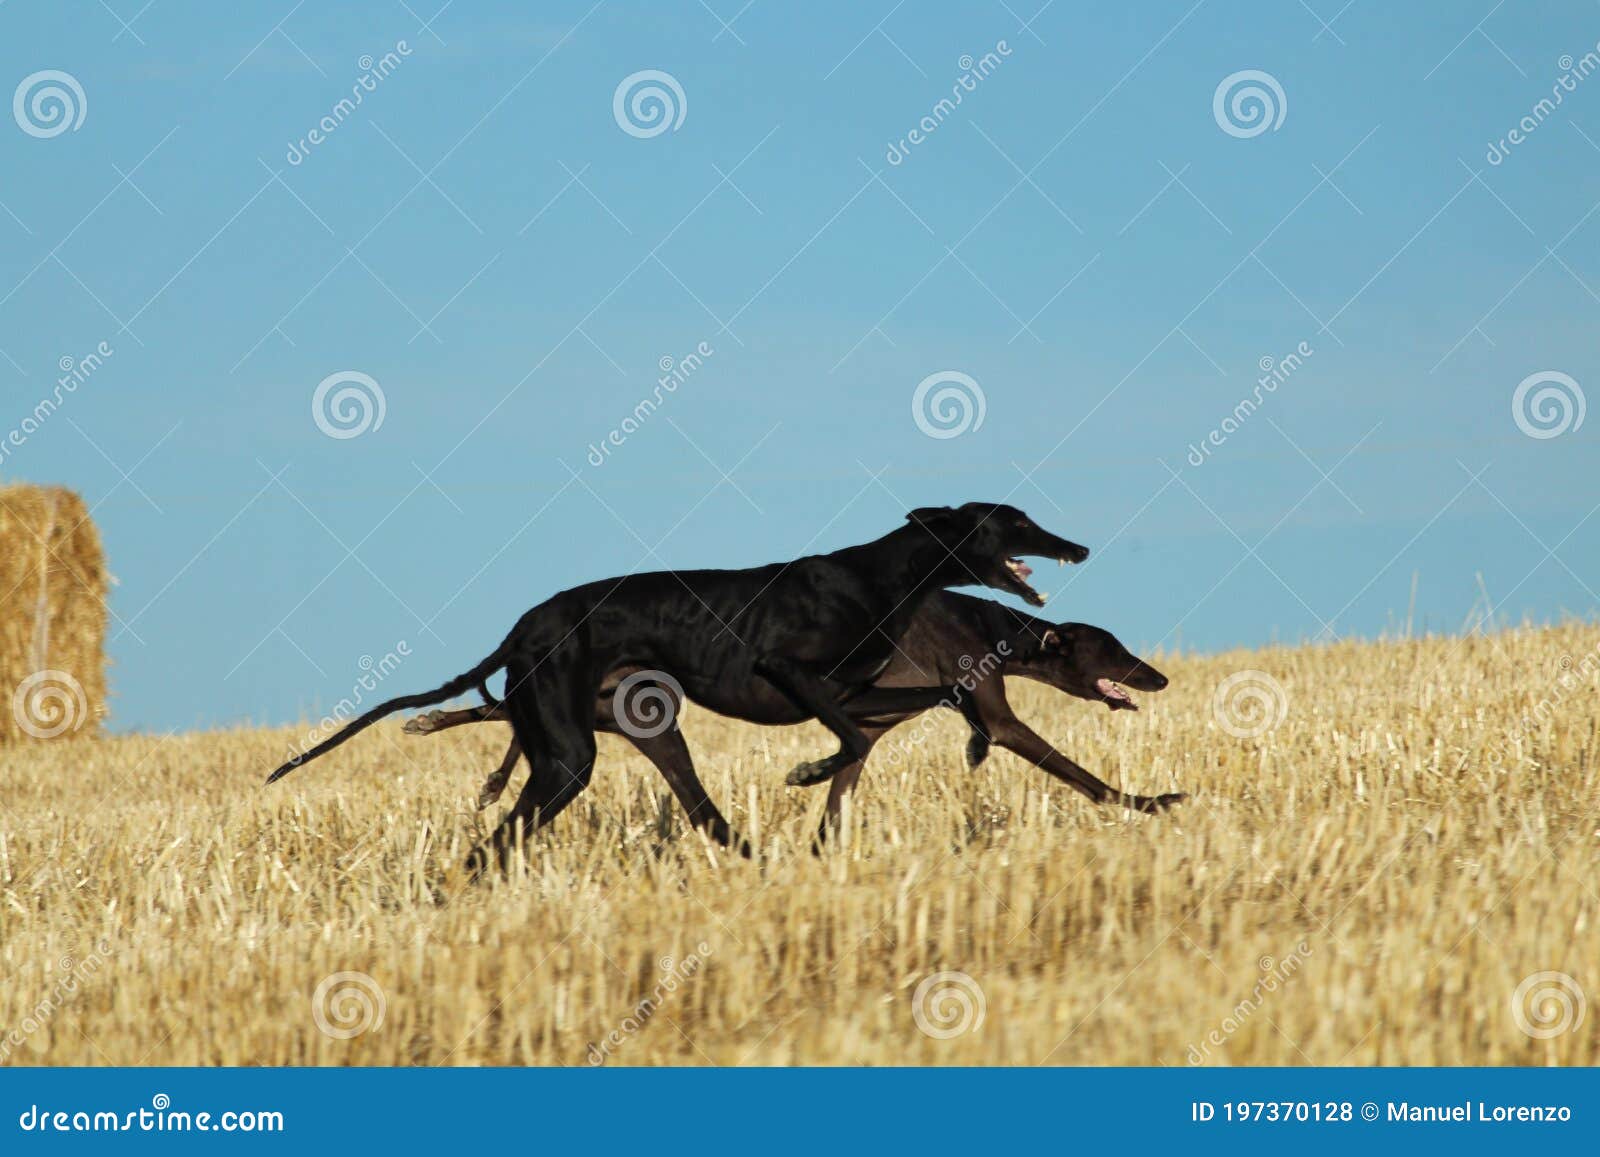 spanish greyhound in mechanical hare race in the countryside